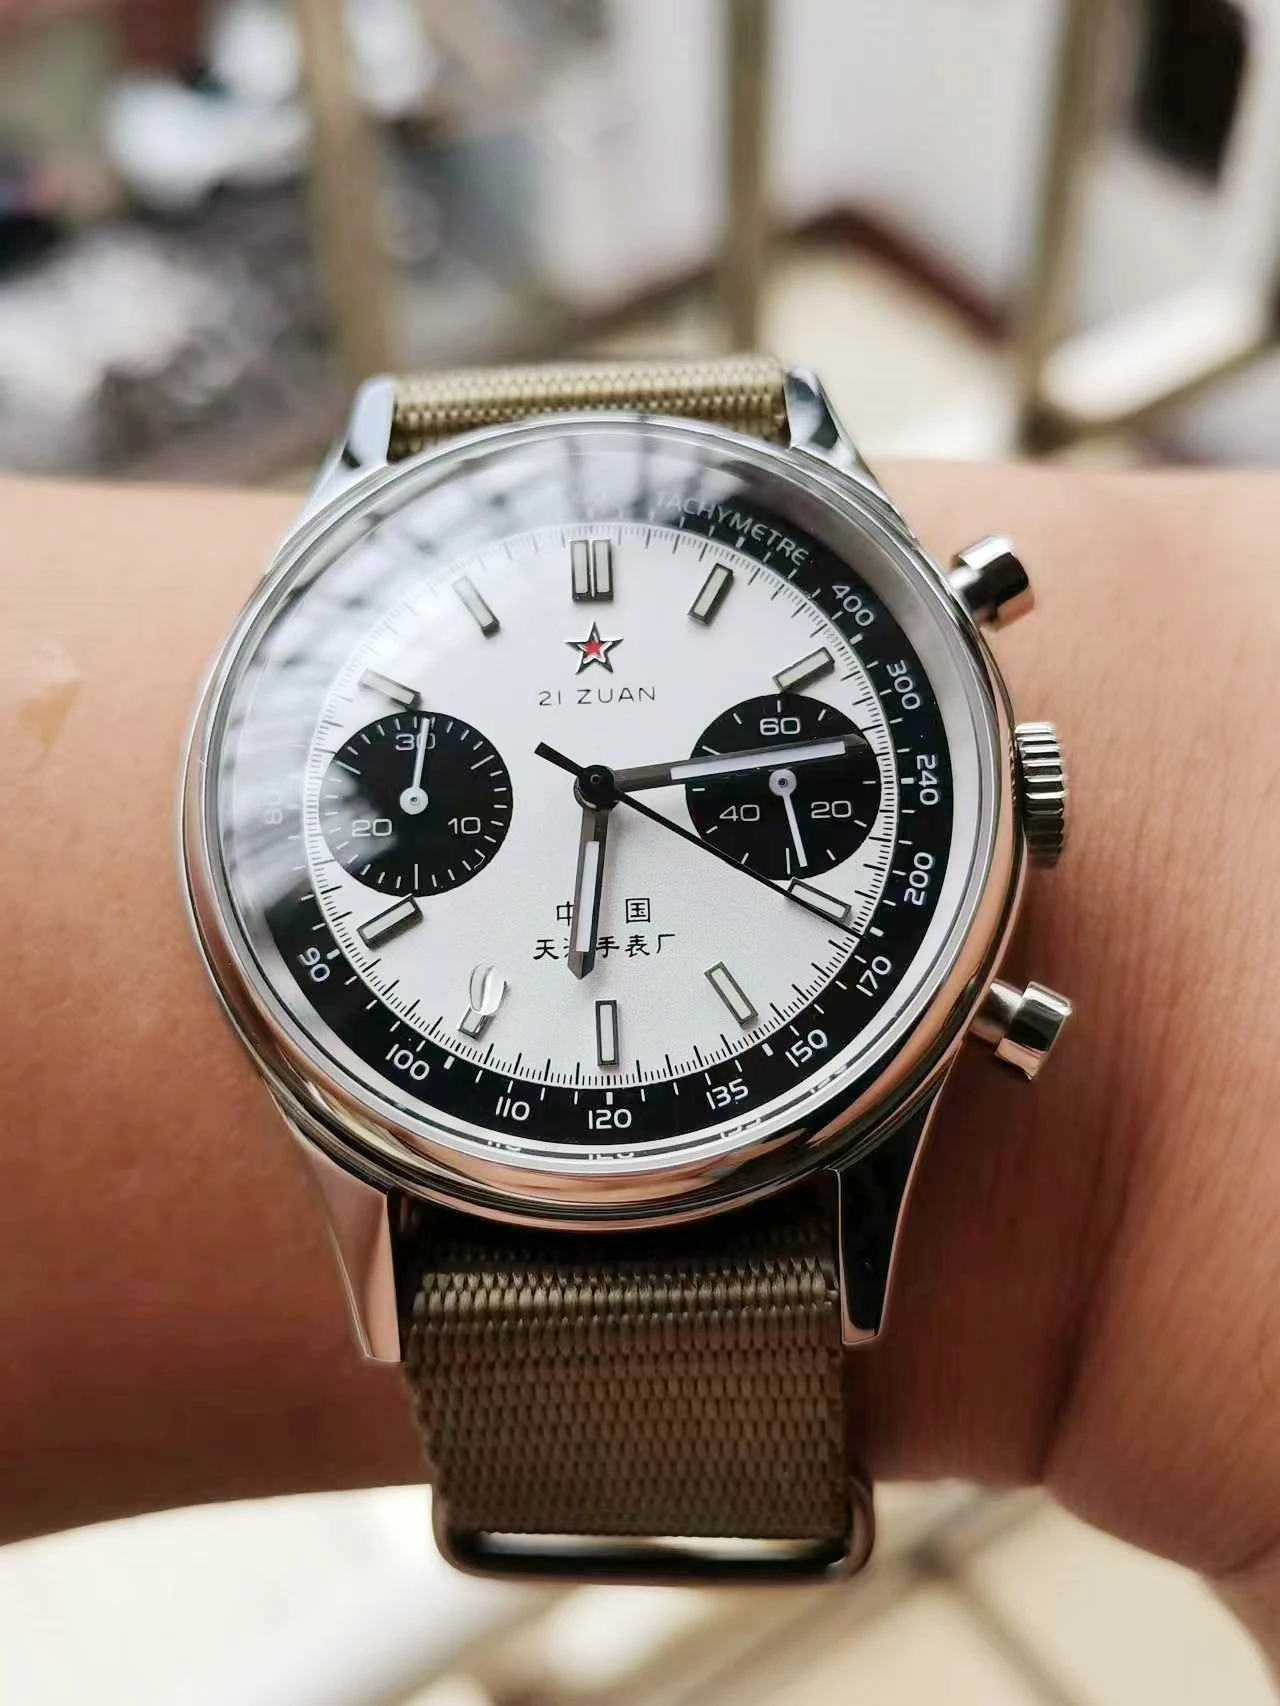 

1963 Watch Pilot 40mm Dial Military 1963 Chronograph Tough Guy Top Personality Domineering Retro Aviation Flight Men Wristwatch